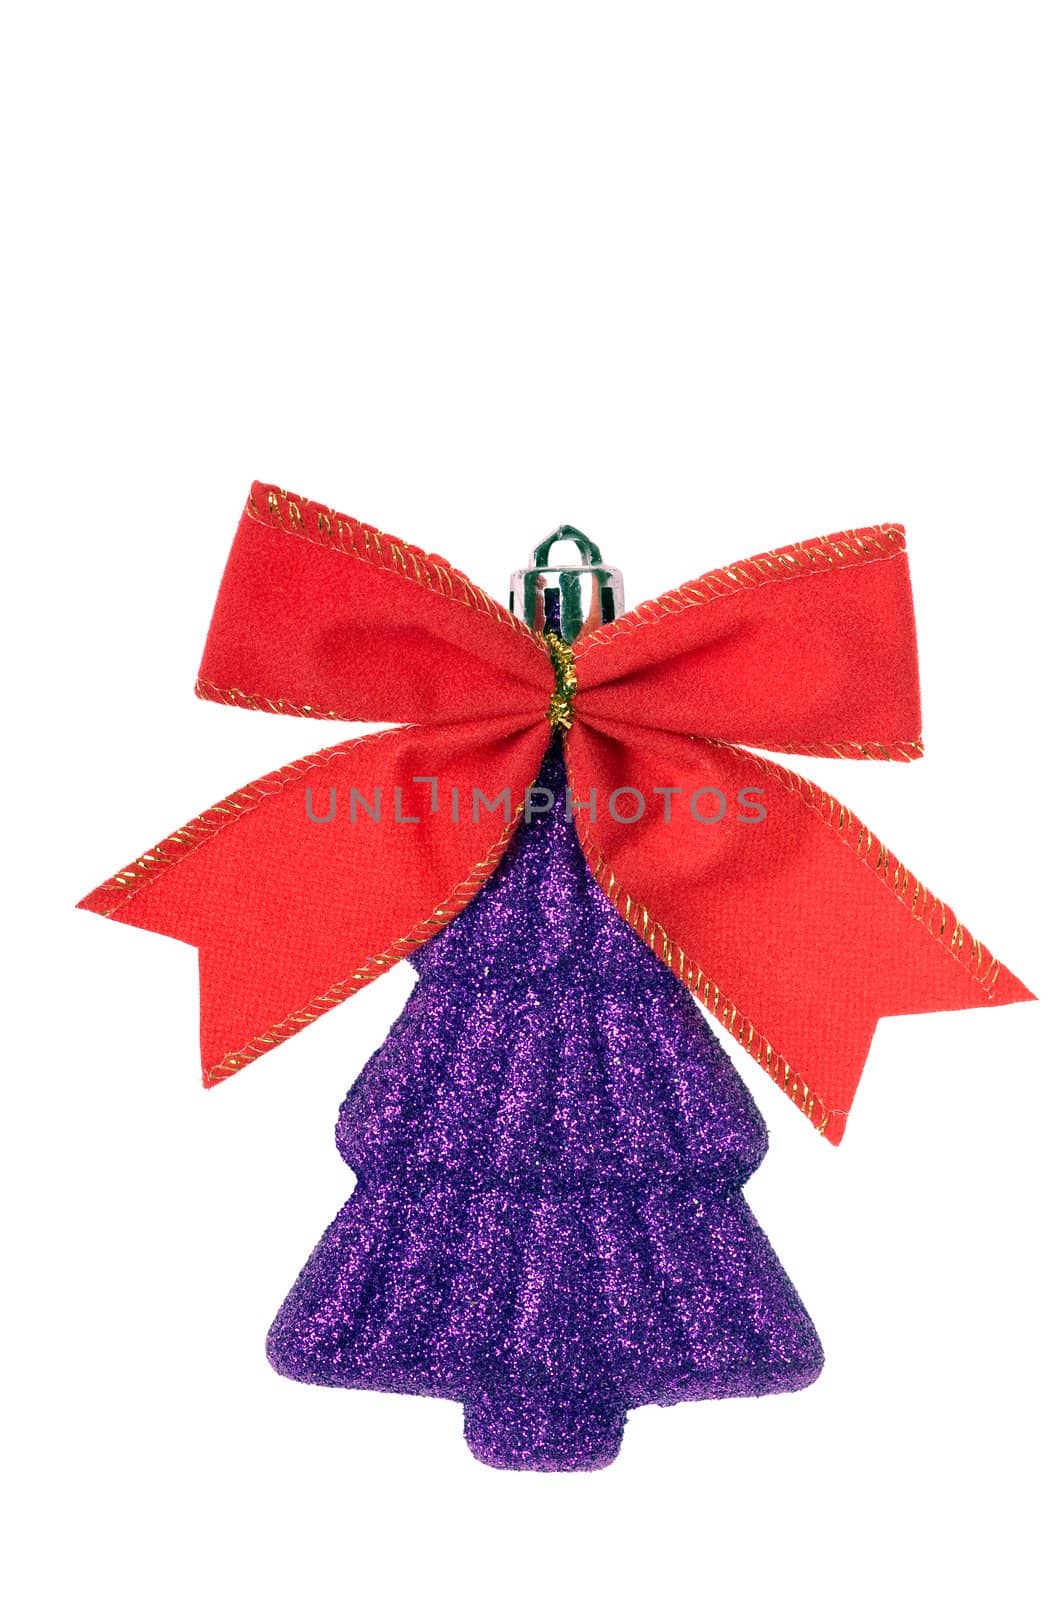 iilac christmas decoration with red bow  isolated on white background